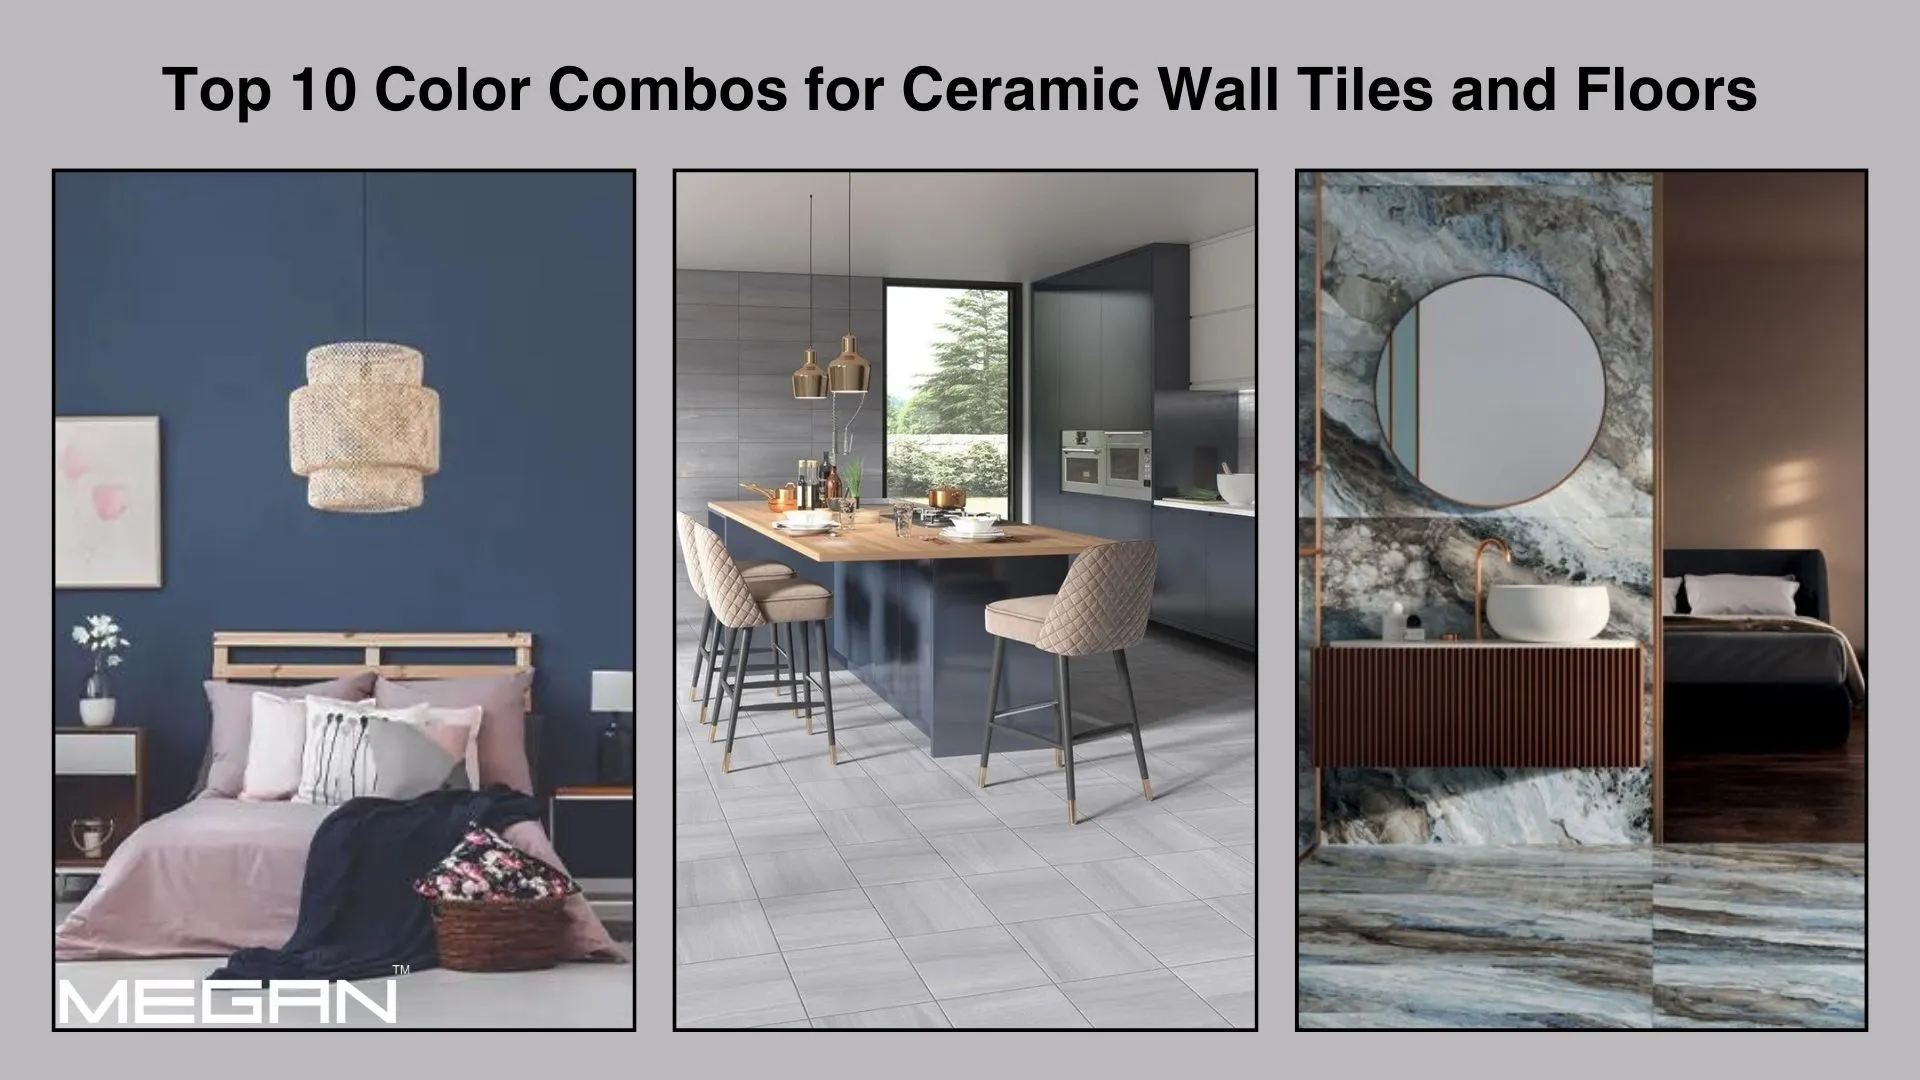 Top 10 Color Combos for Ceramic Wall Tiles and Floors